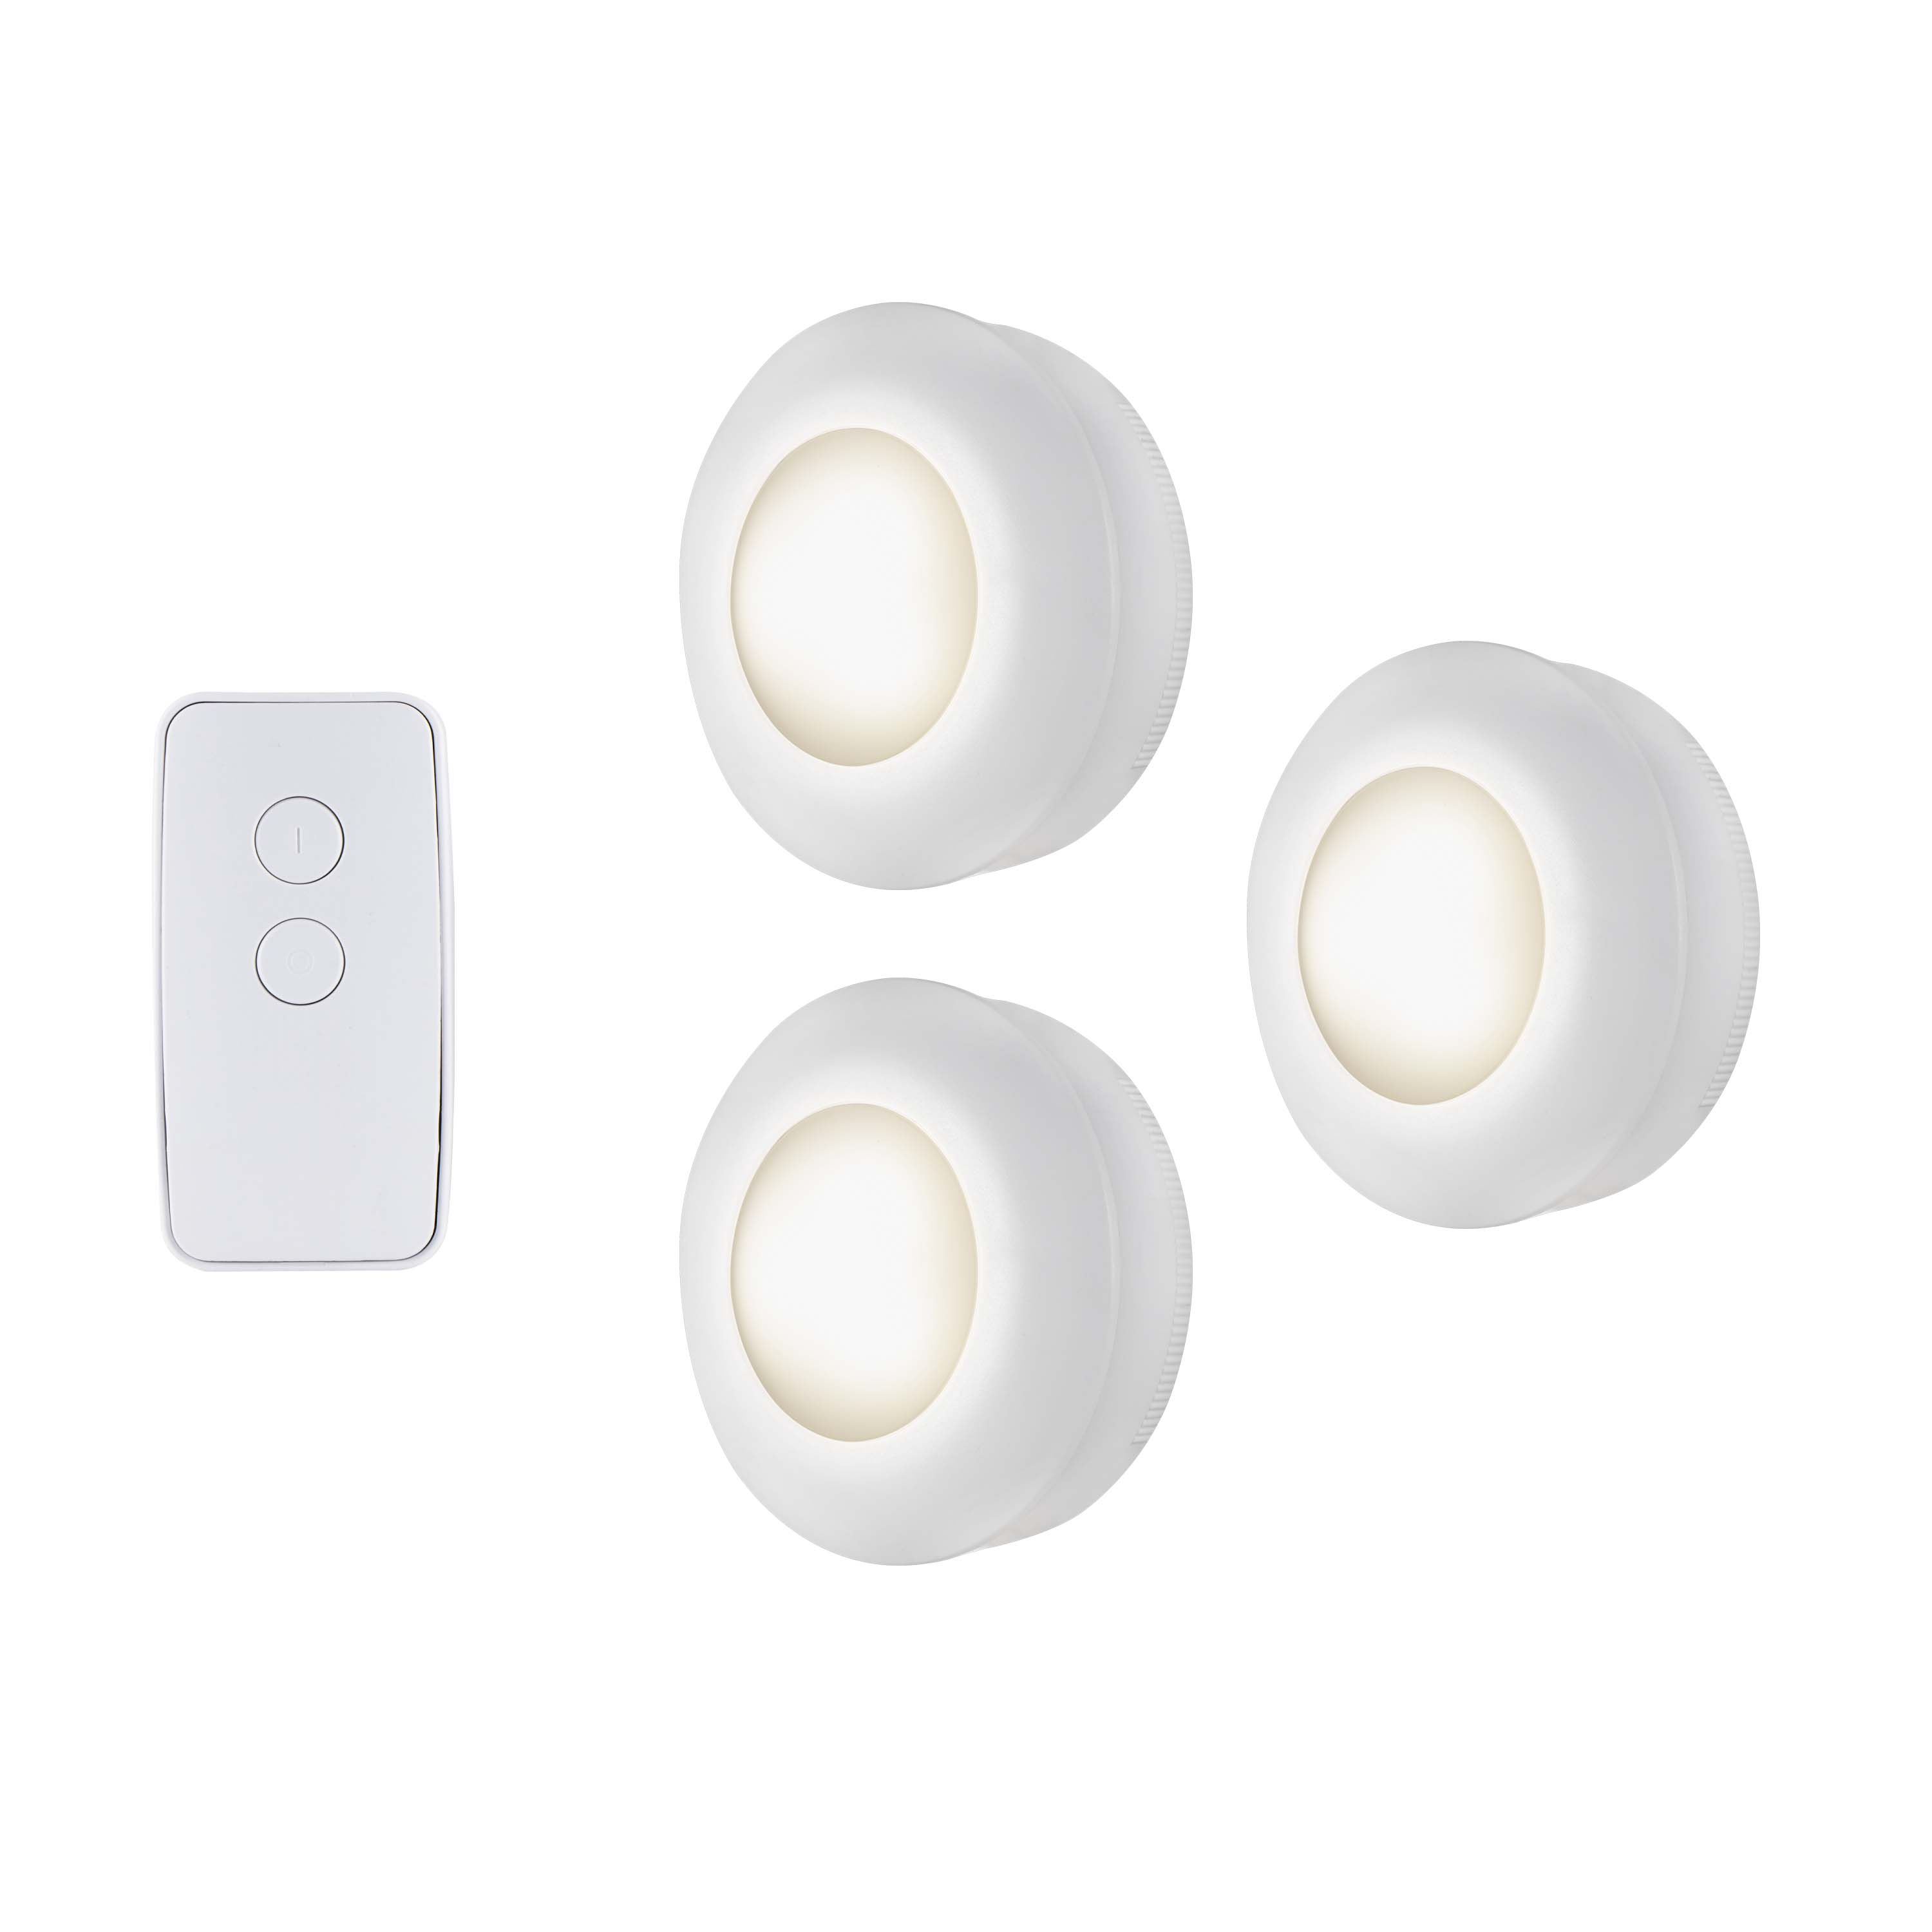 Dimmable LED Under Cabinet Lighting with Remote Control Warm White 3 PCS 